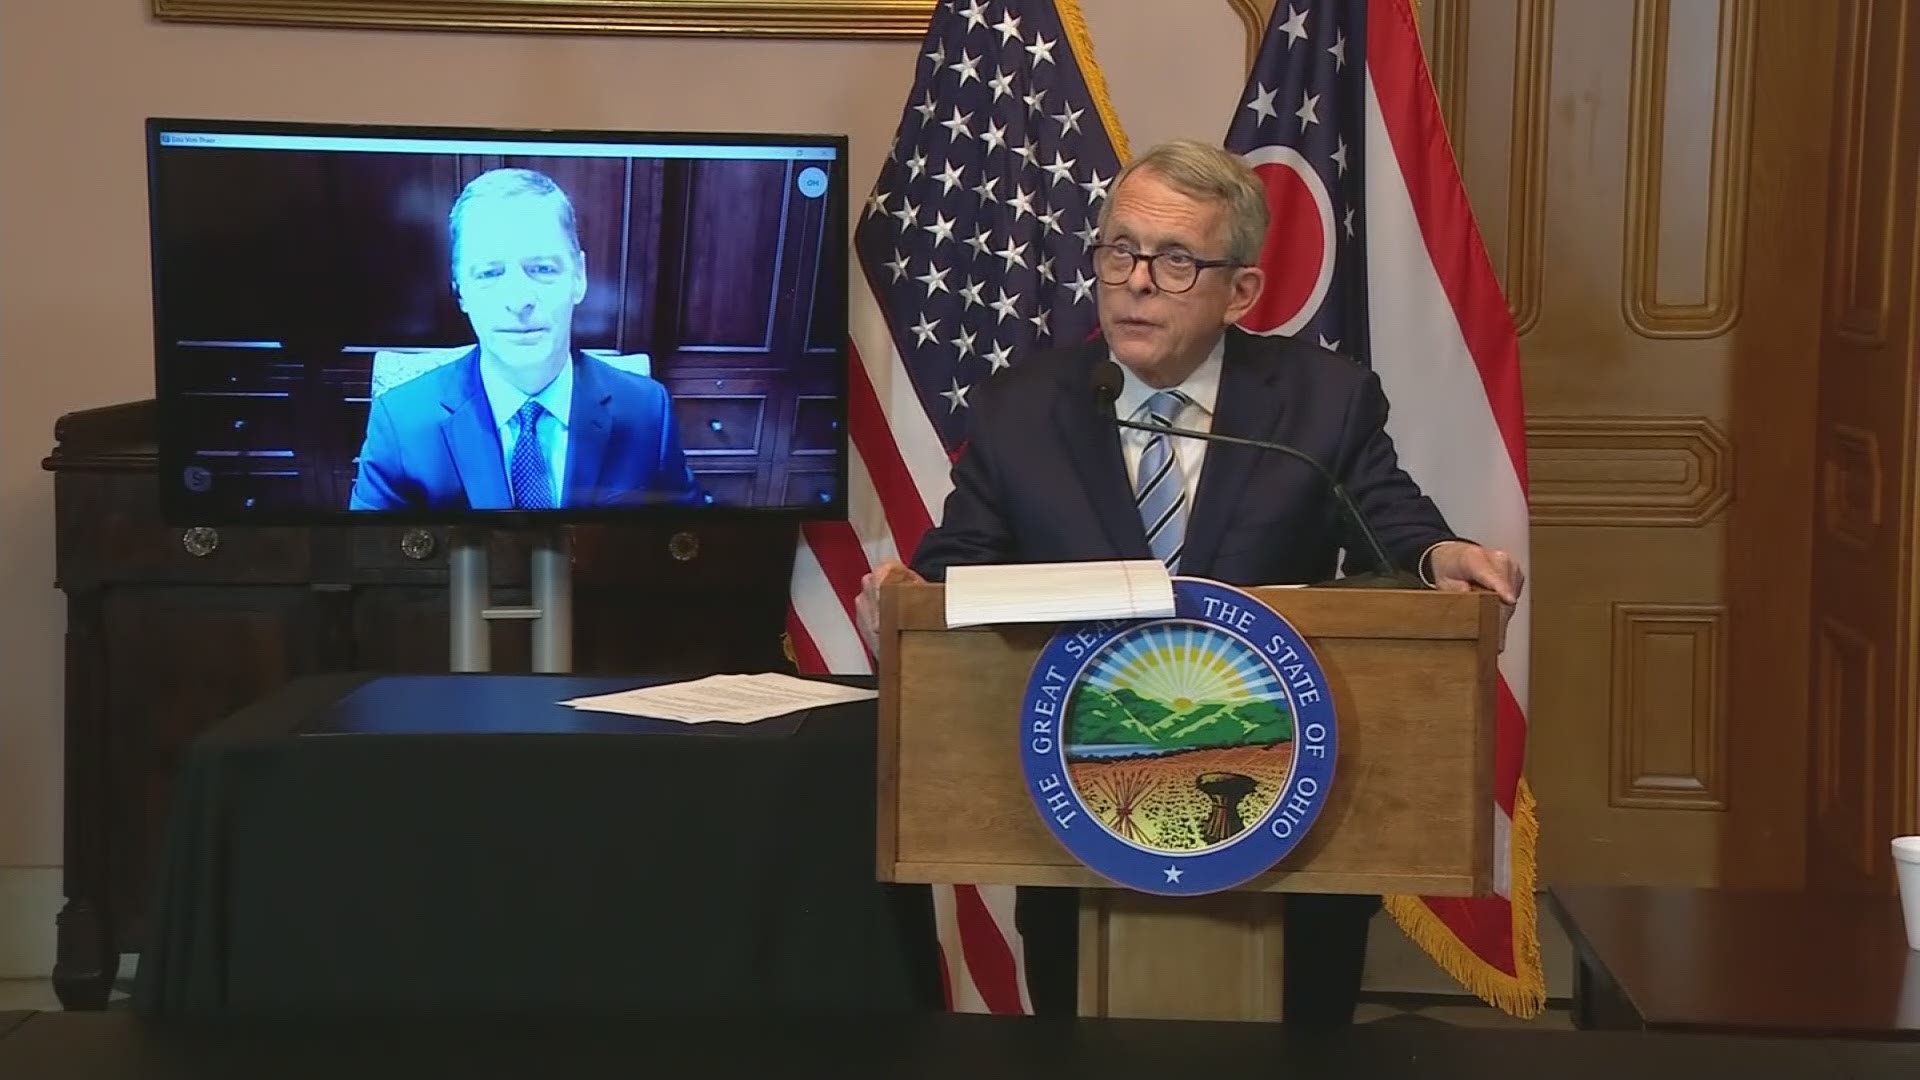 President Trump calls for quick FDA approval of Battelle technology to sterilize masks.  "Lives are literally at stake," says DeWine.